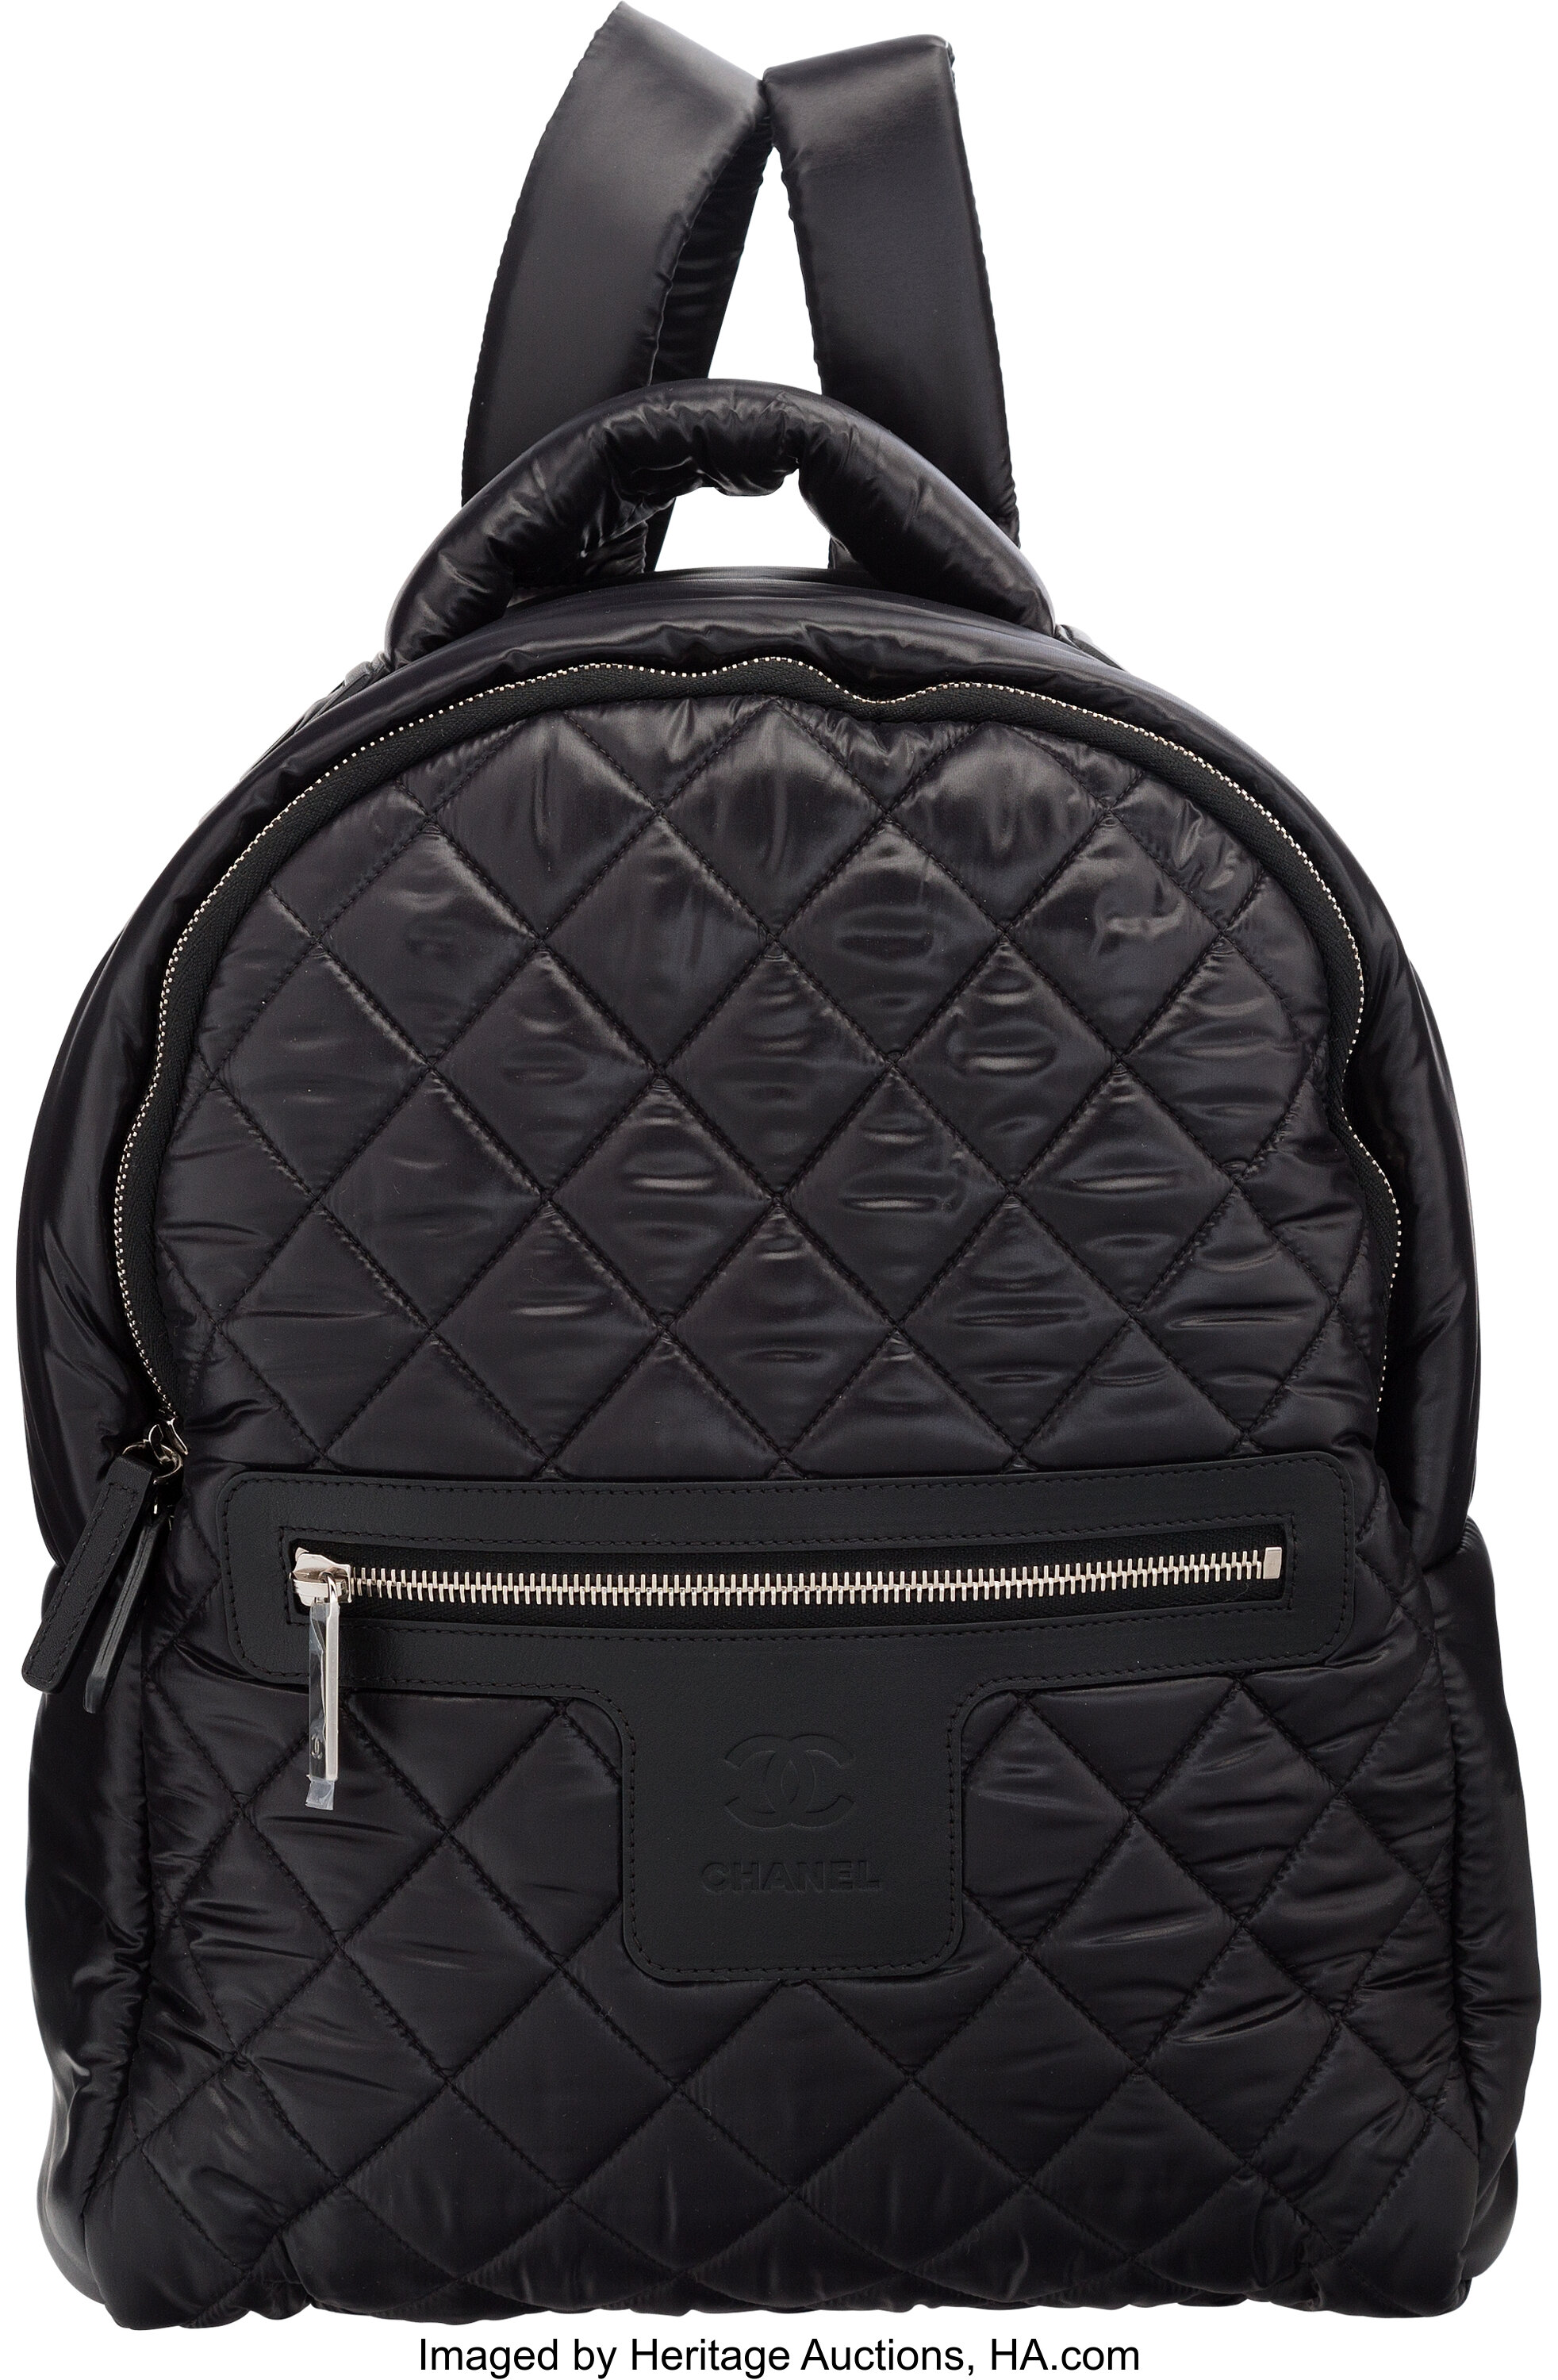 Chanel Black Quilted Nylon Backpack Bag with Silver Hardware. | Lot ...